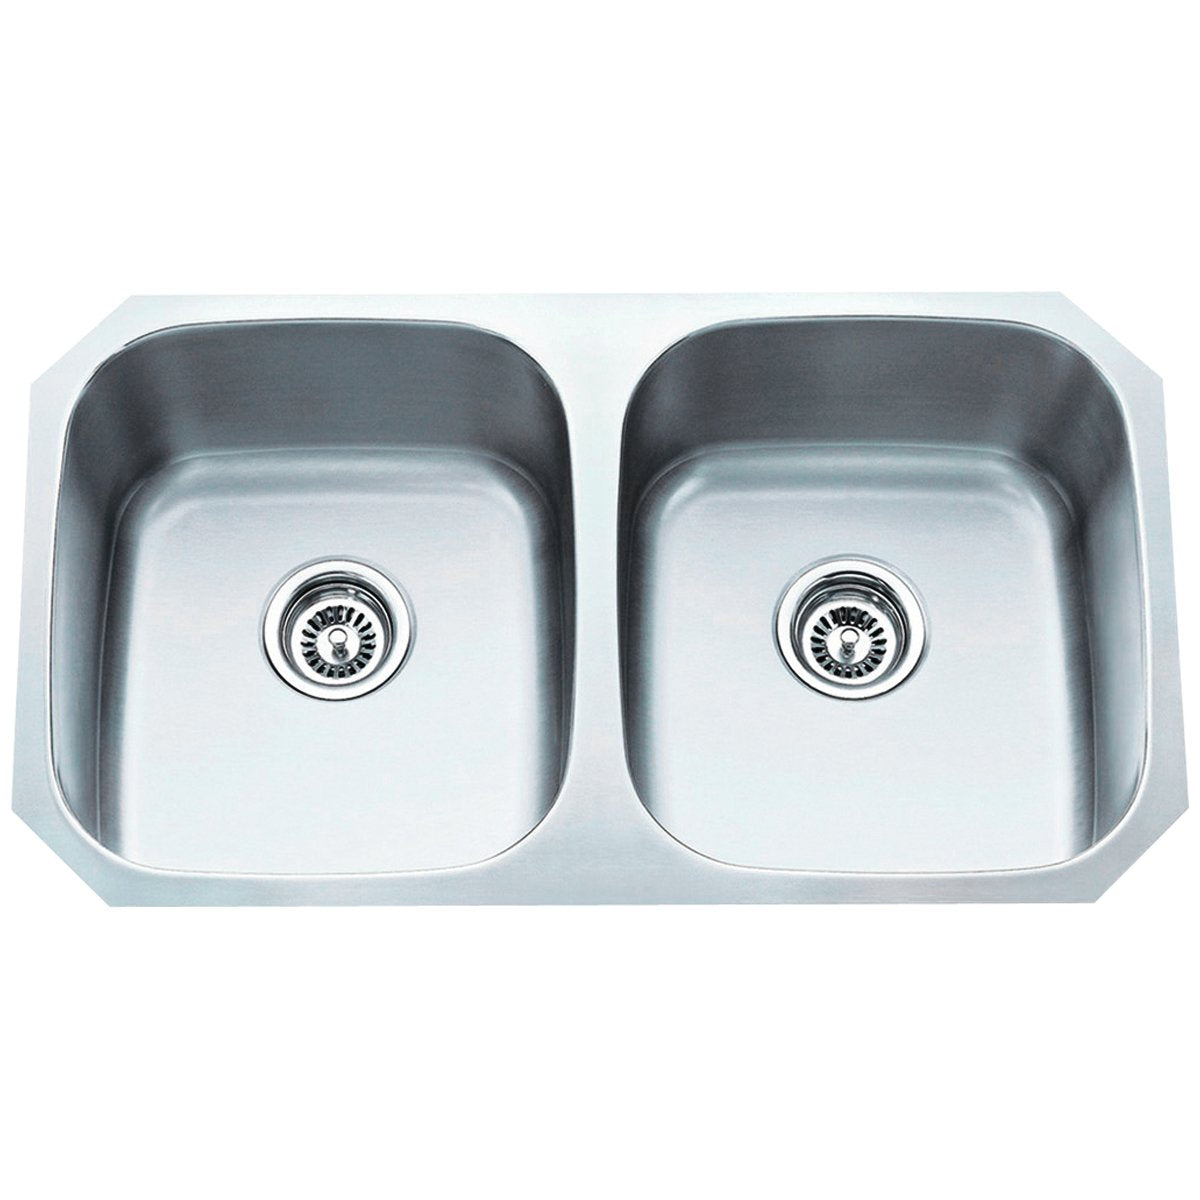 Hardware Resources Stainless Steel 18 Gauge Kitchen Sink with Two Equal Bowls-DirectSinks